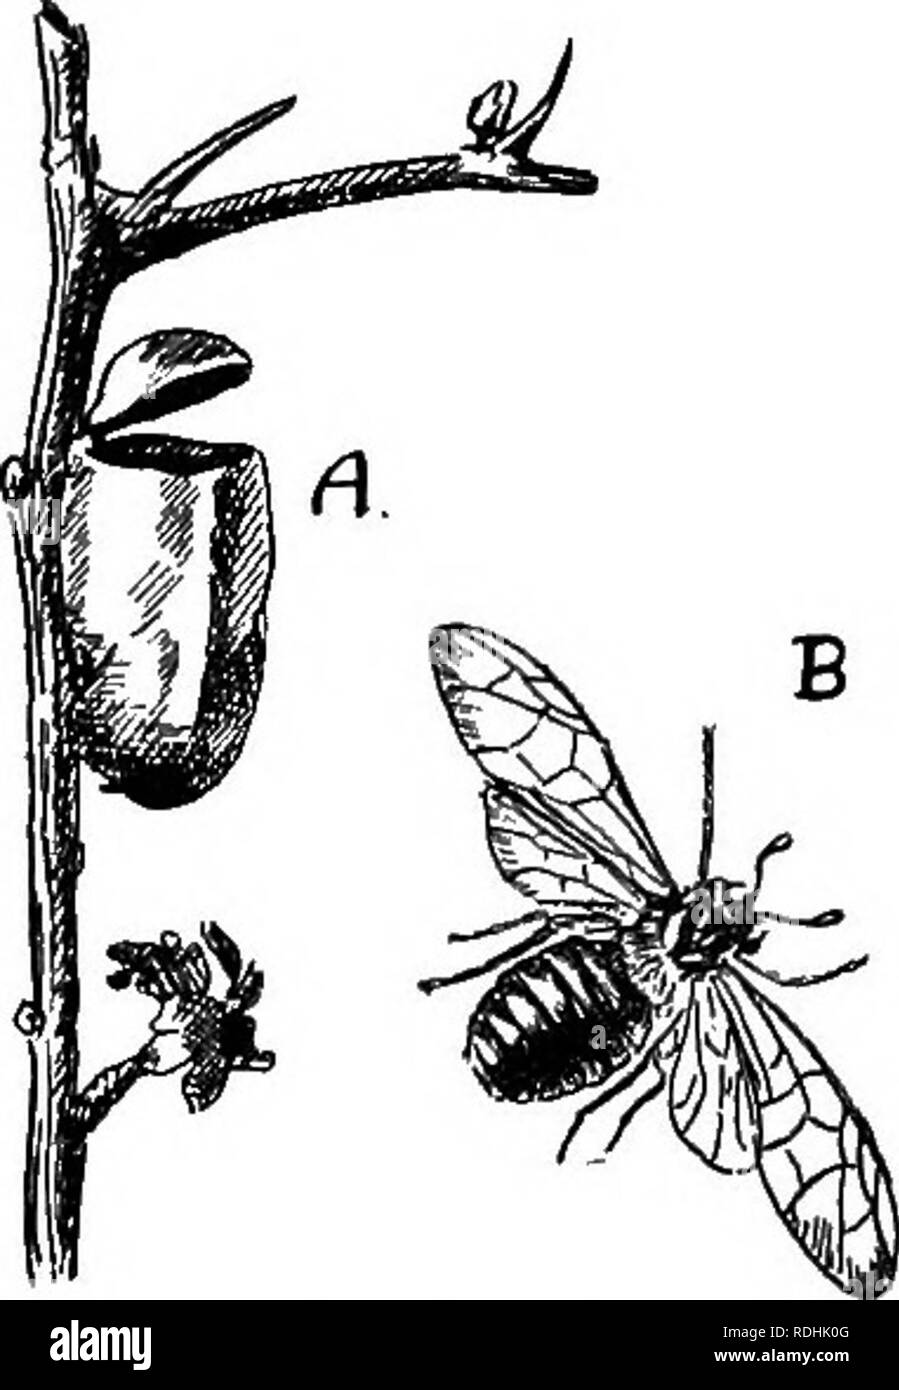 . An introduction to zoology, with directions for practical work (invertebrates). 432 INTRODUCTION TO ZOOLOGY Other forms equally injurious are the Currant ^S^-flieT^ Saw-fly {NemaUs ribesii) and the Gooseberry Saw- fly {N. veniricosus), forms which at times literally strip the bushes of their leaves. The Turnip Saw-fly (Jthalia spinarum) has small black larvae whicb do great damage to the leaves of turnip crops. Trichiosoma befuleti (Fig. 324) is a Saw-fly the larva of which feeds on the hawthorn in July and August; it is green with minute white spots, and on pupation it makes for itself a si Stock Photo